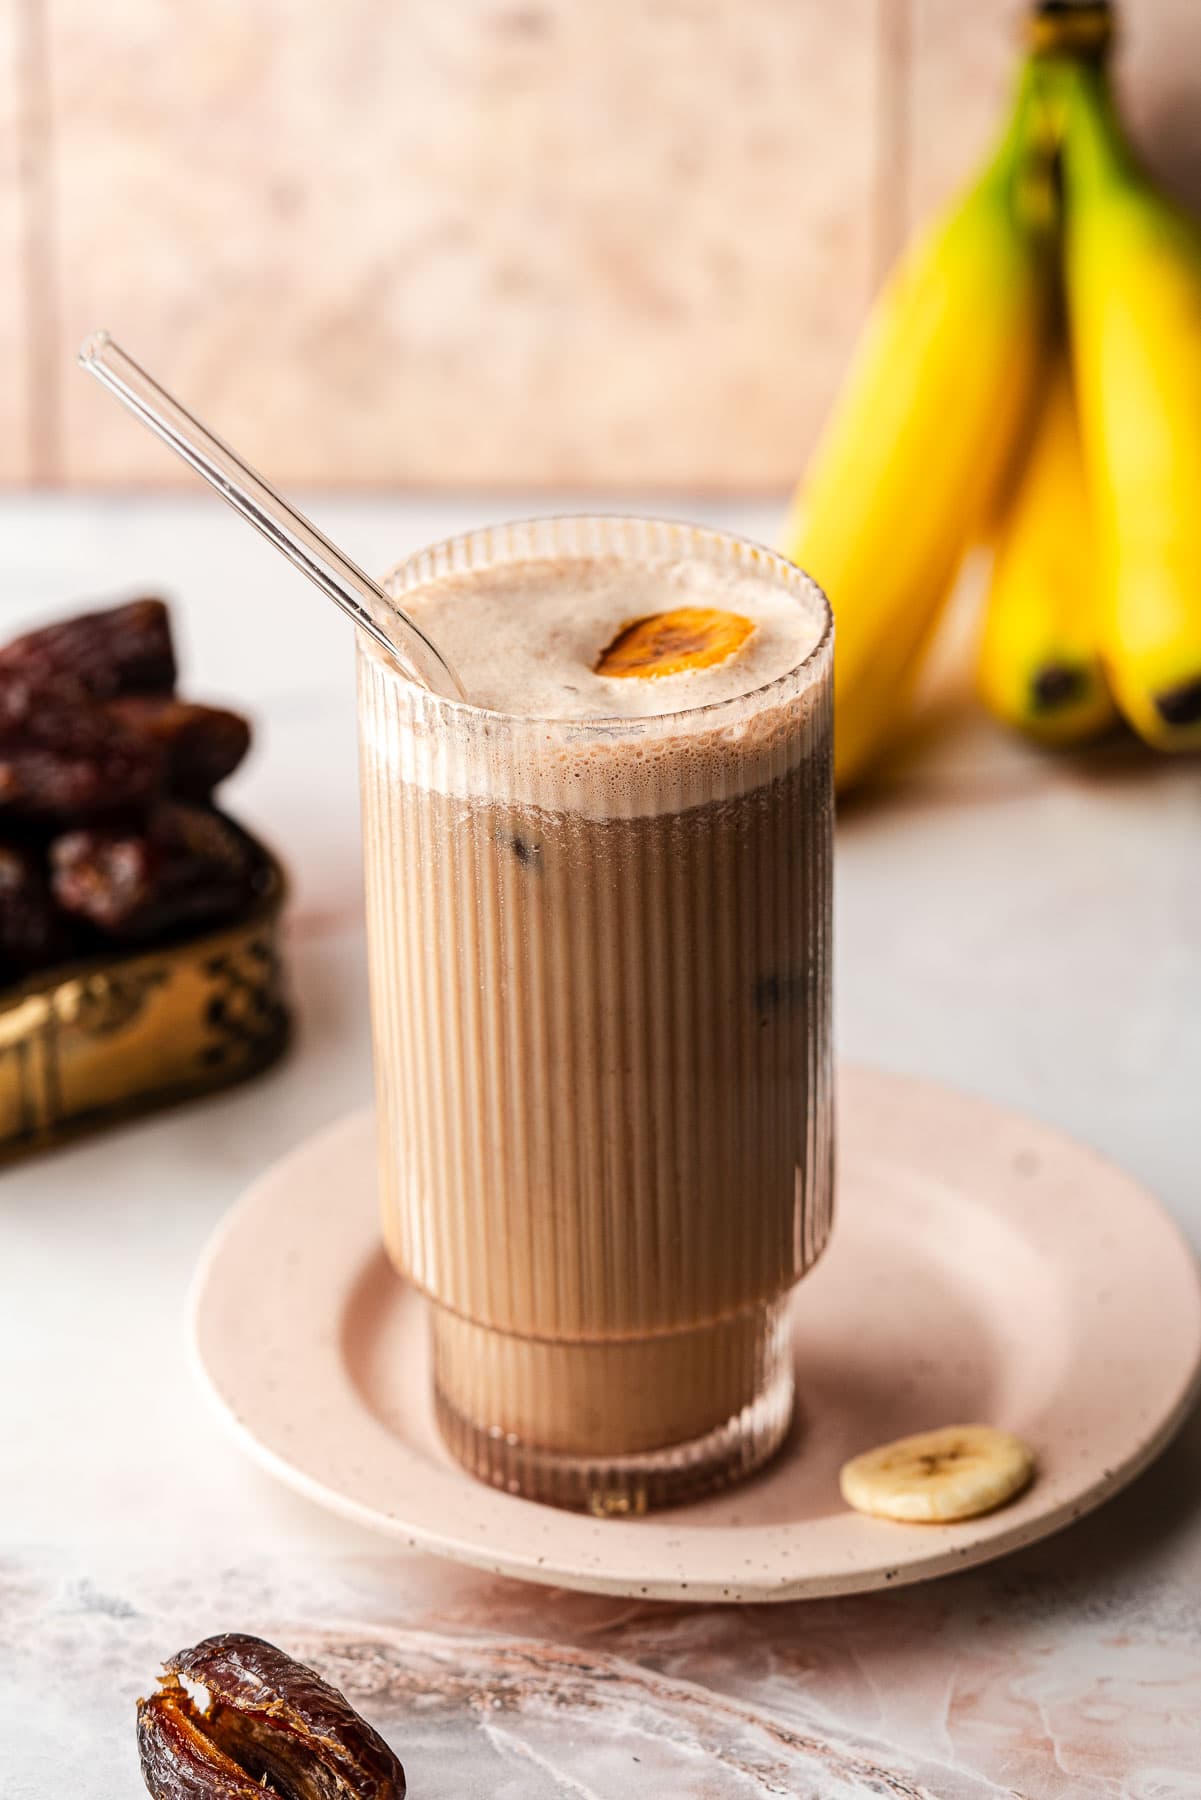 Banana Date Latte with a straw on a plate with dates and bananas.